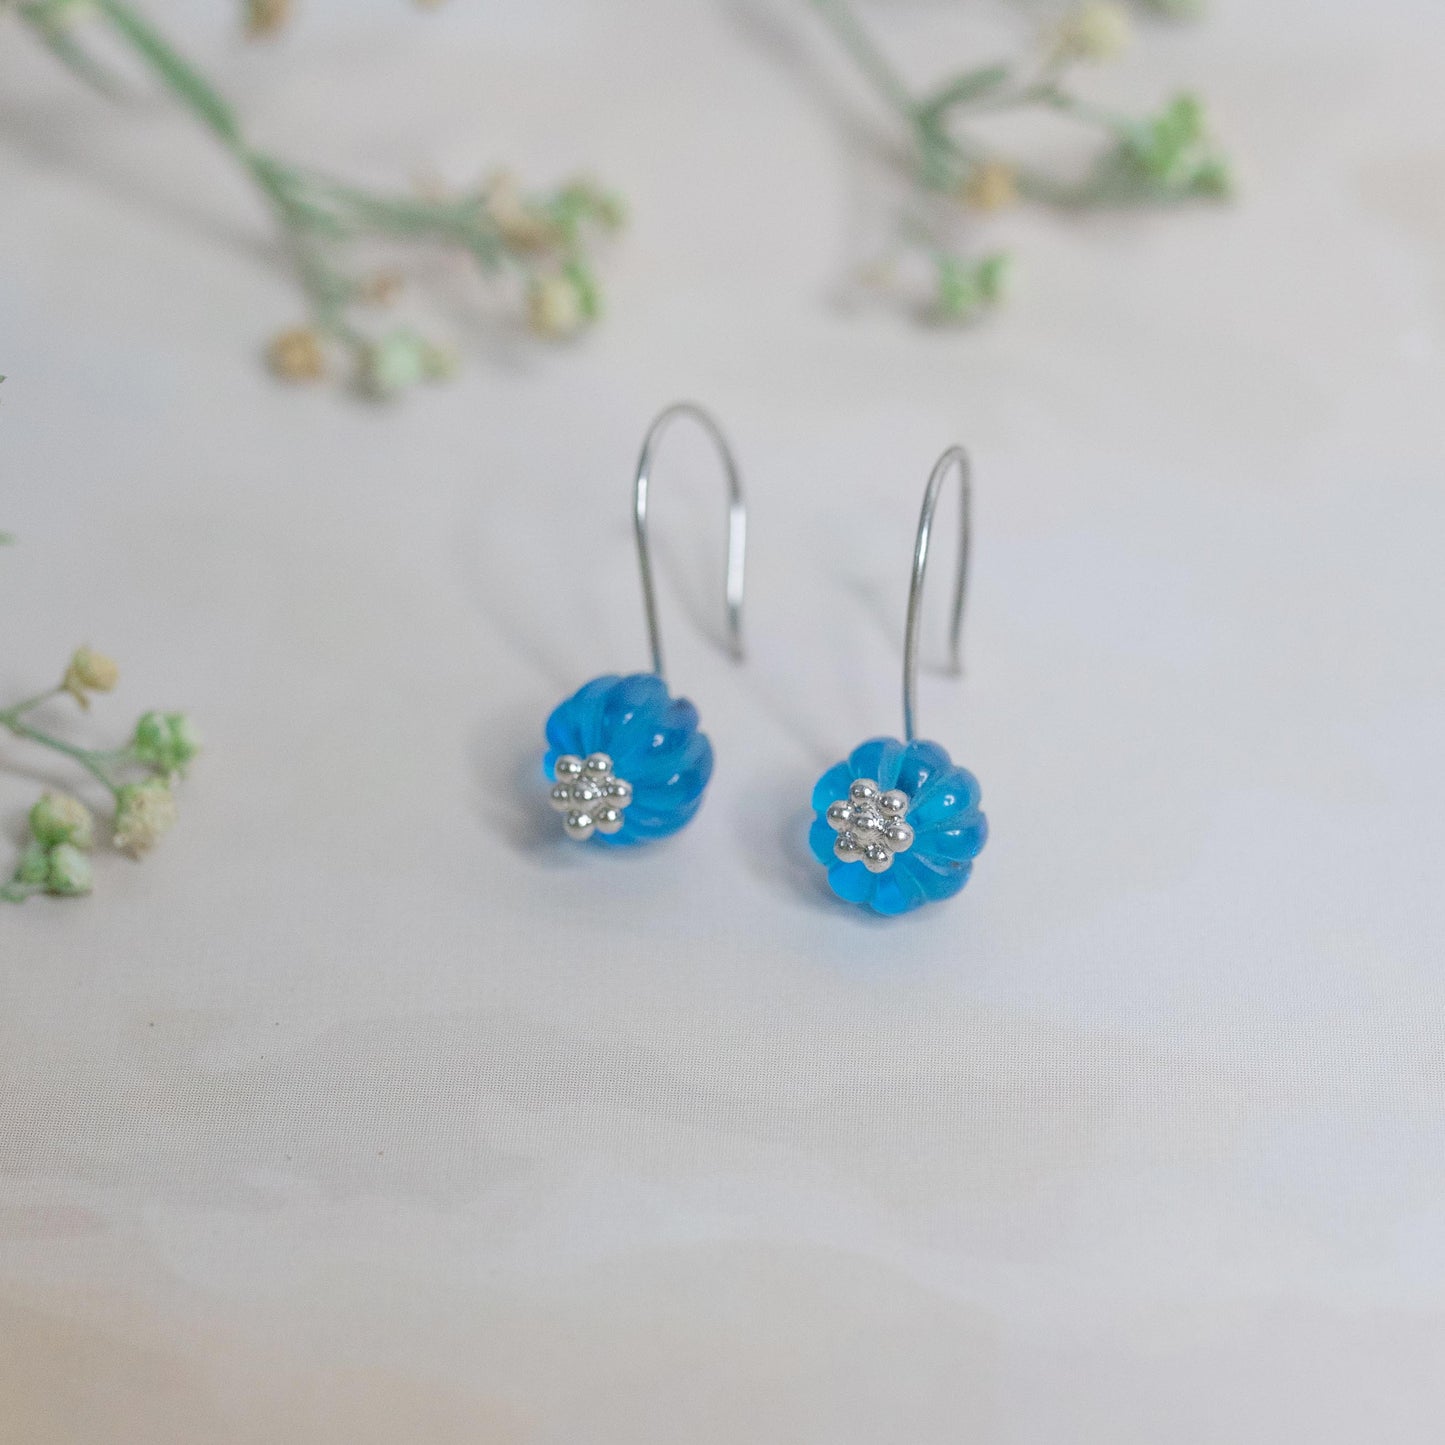 Blue and Yellow Hydro Beads Earrings